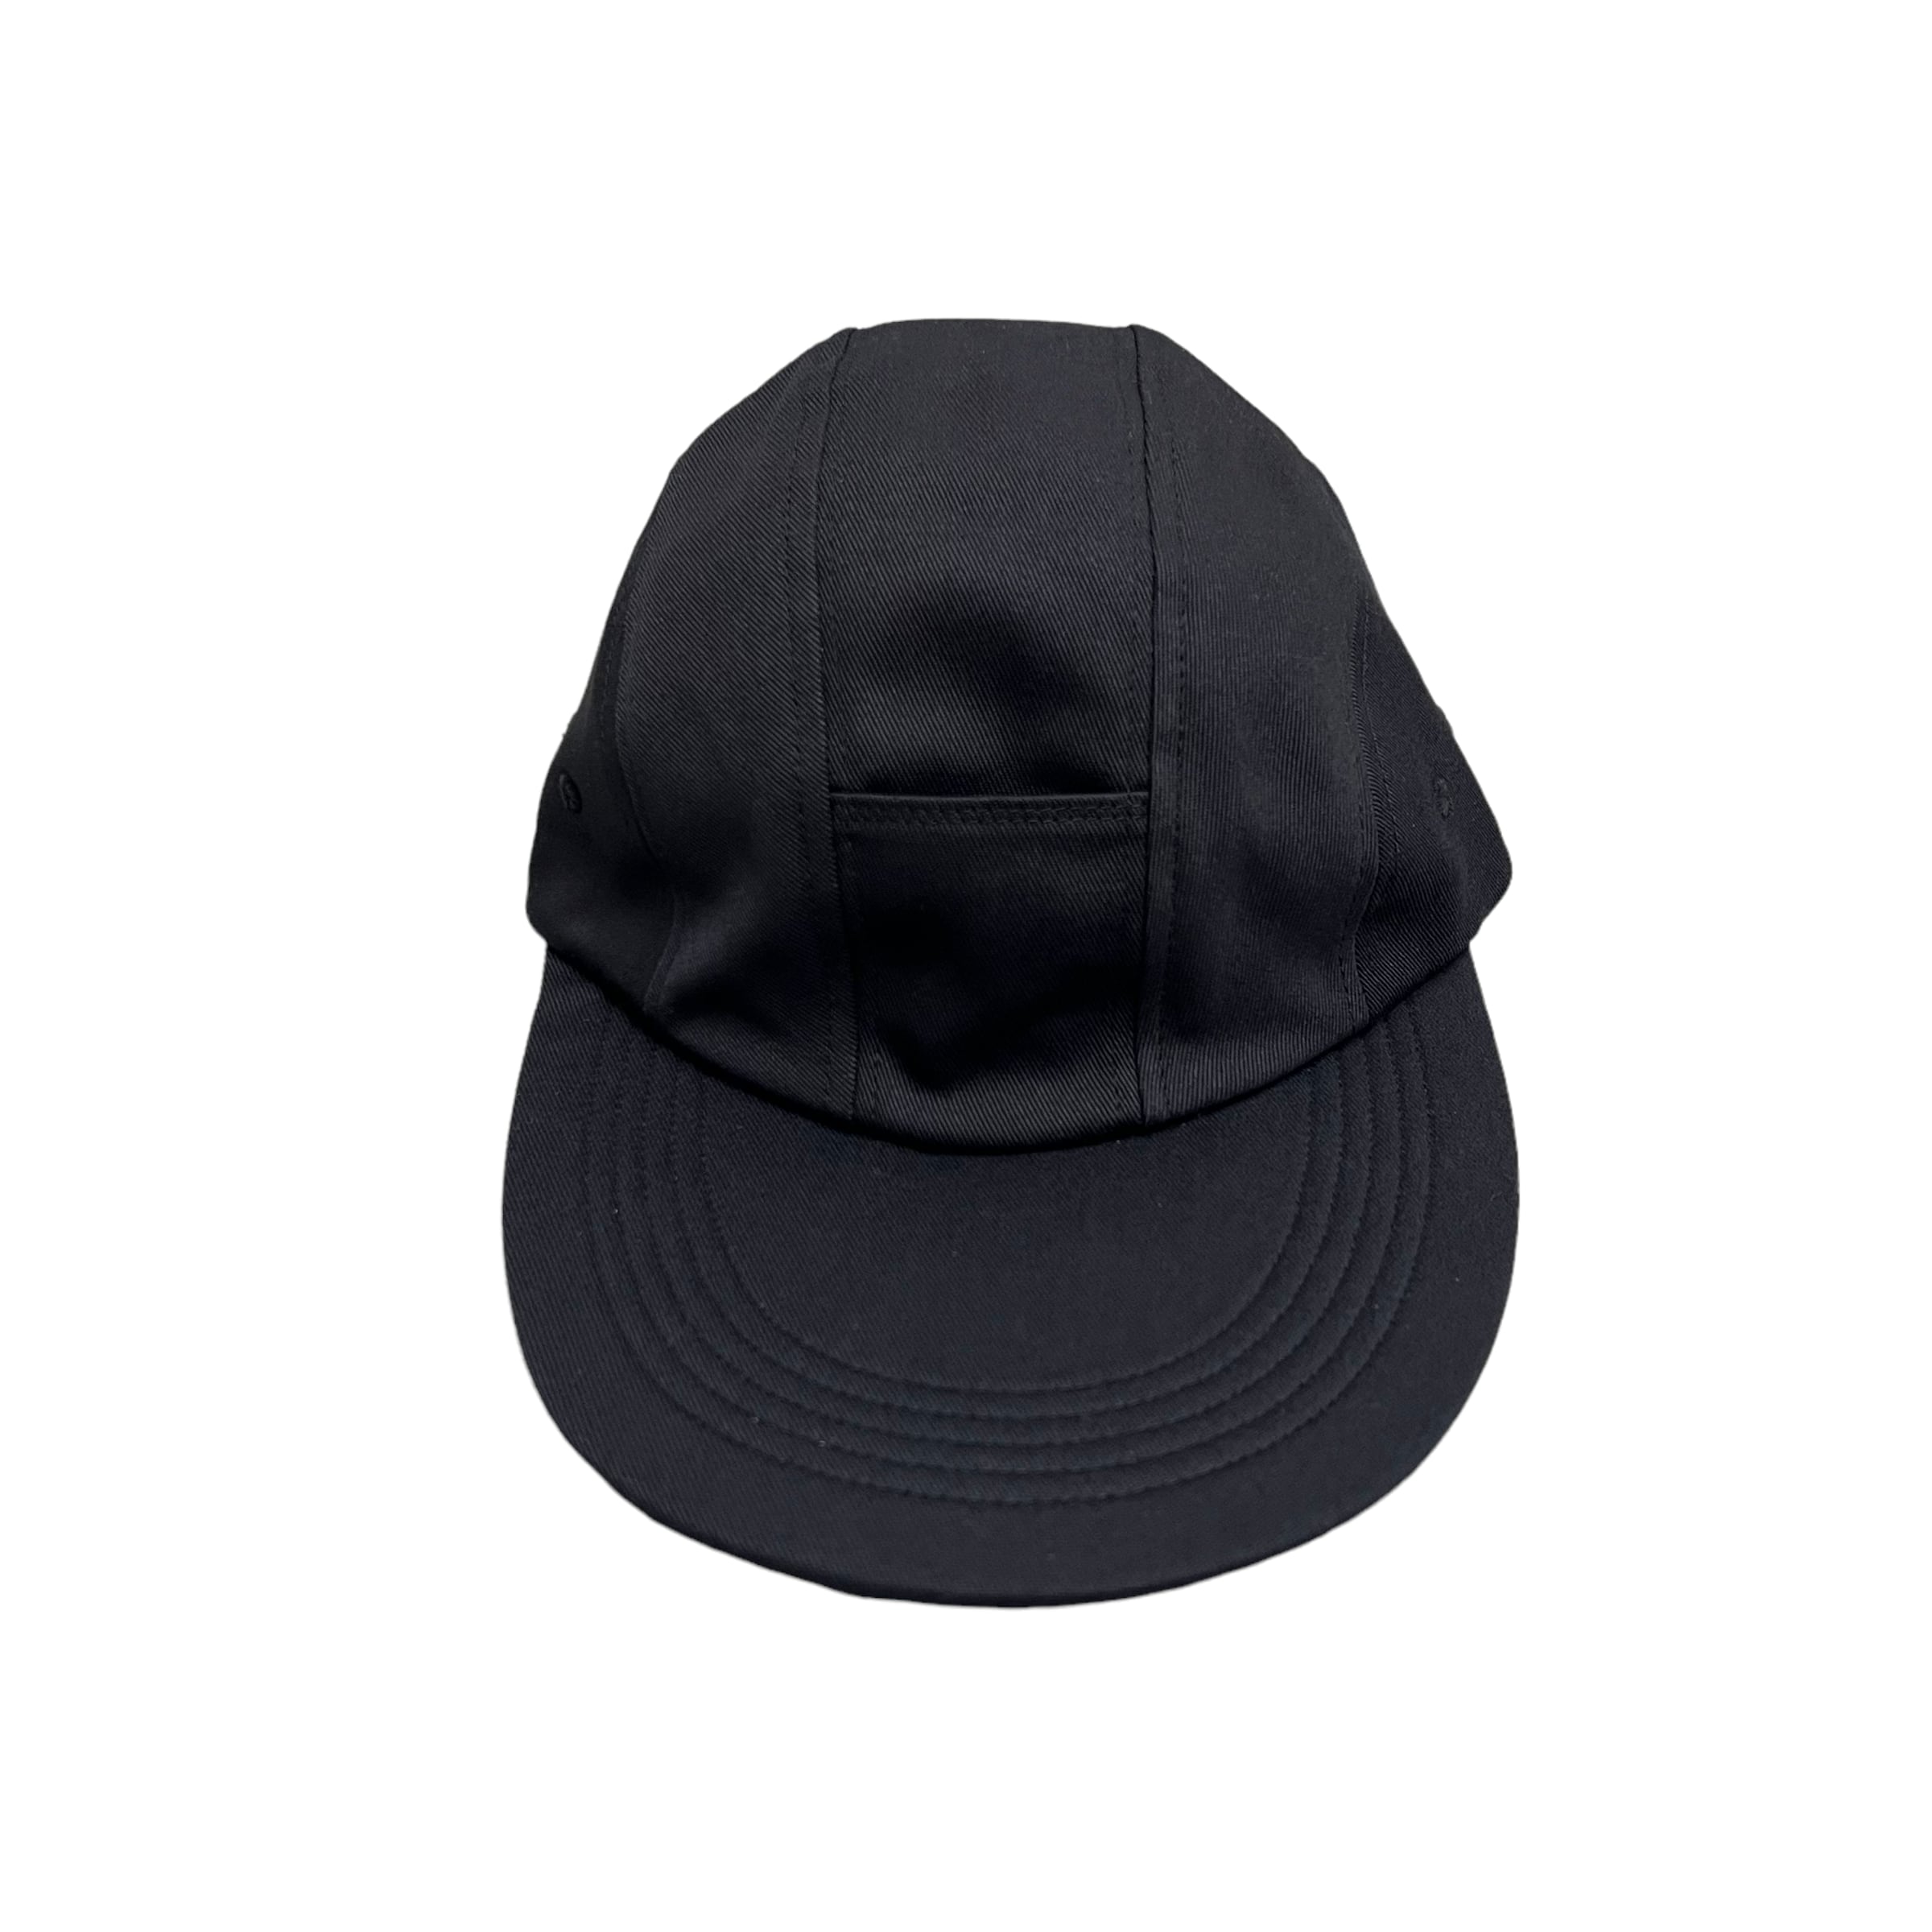 NOROLL / TICKET CAP BLACK | THE NEWAGE CLUB powered by BASE